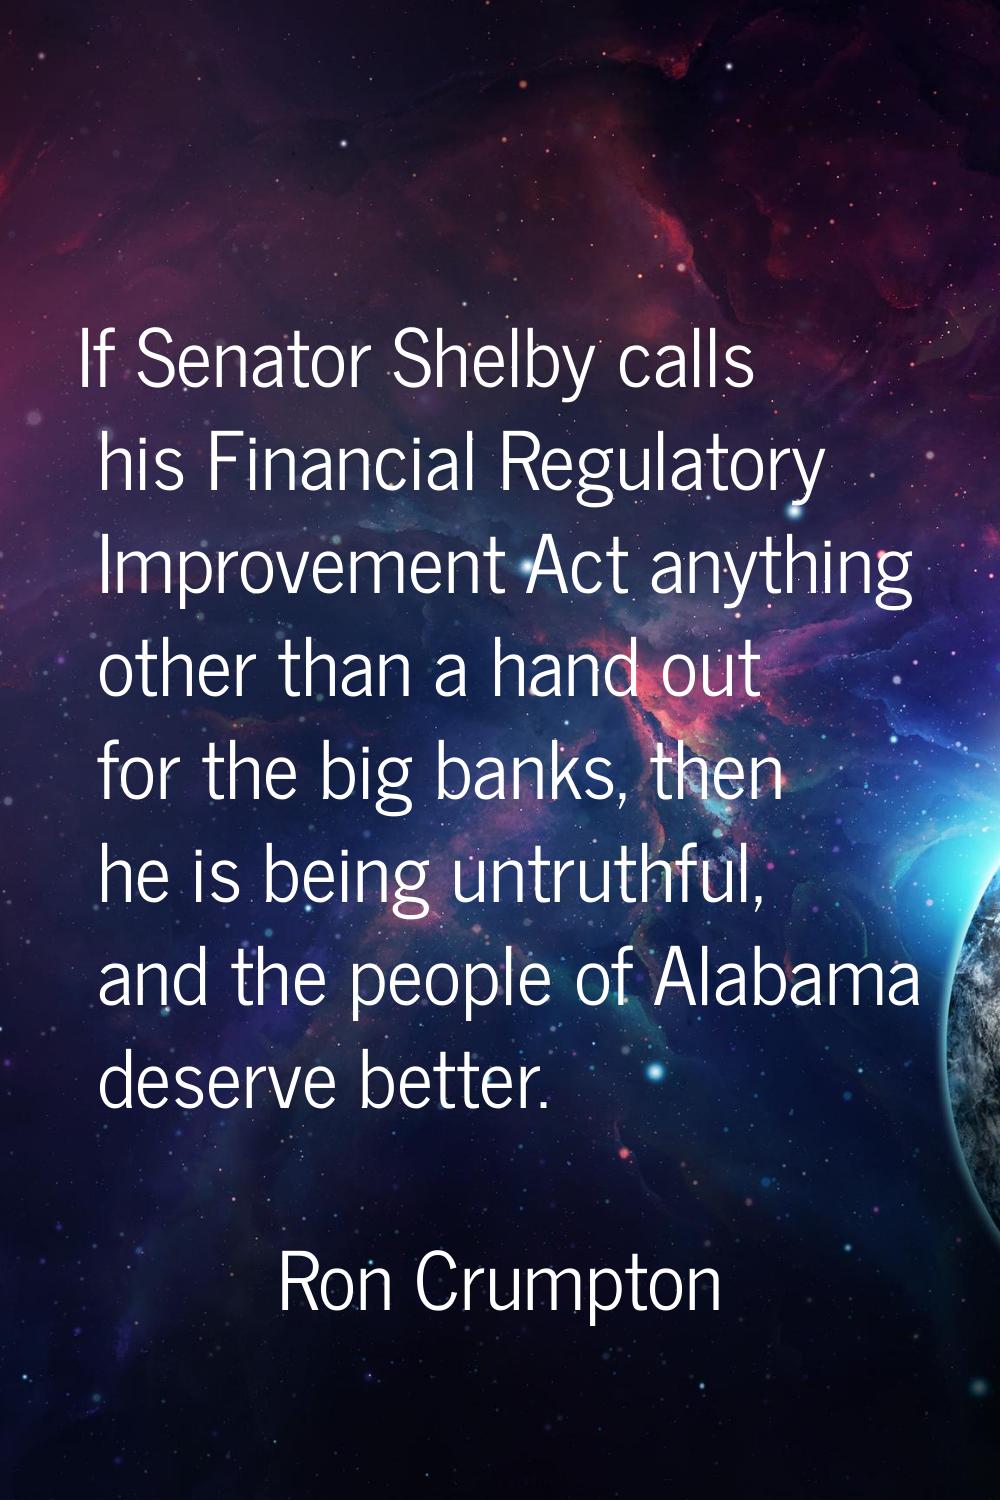 If Senator Shelby calls his Financial Regulatory Improvement Act anything other than a hand out for